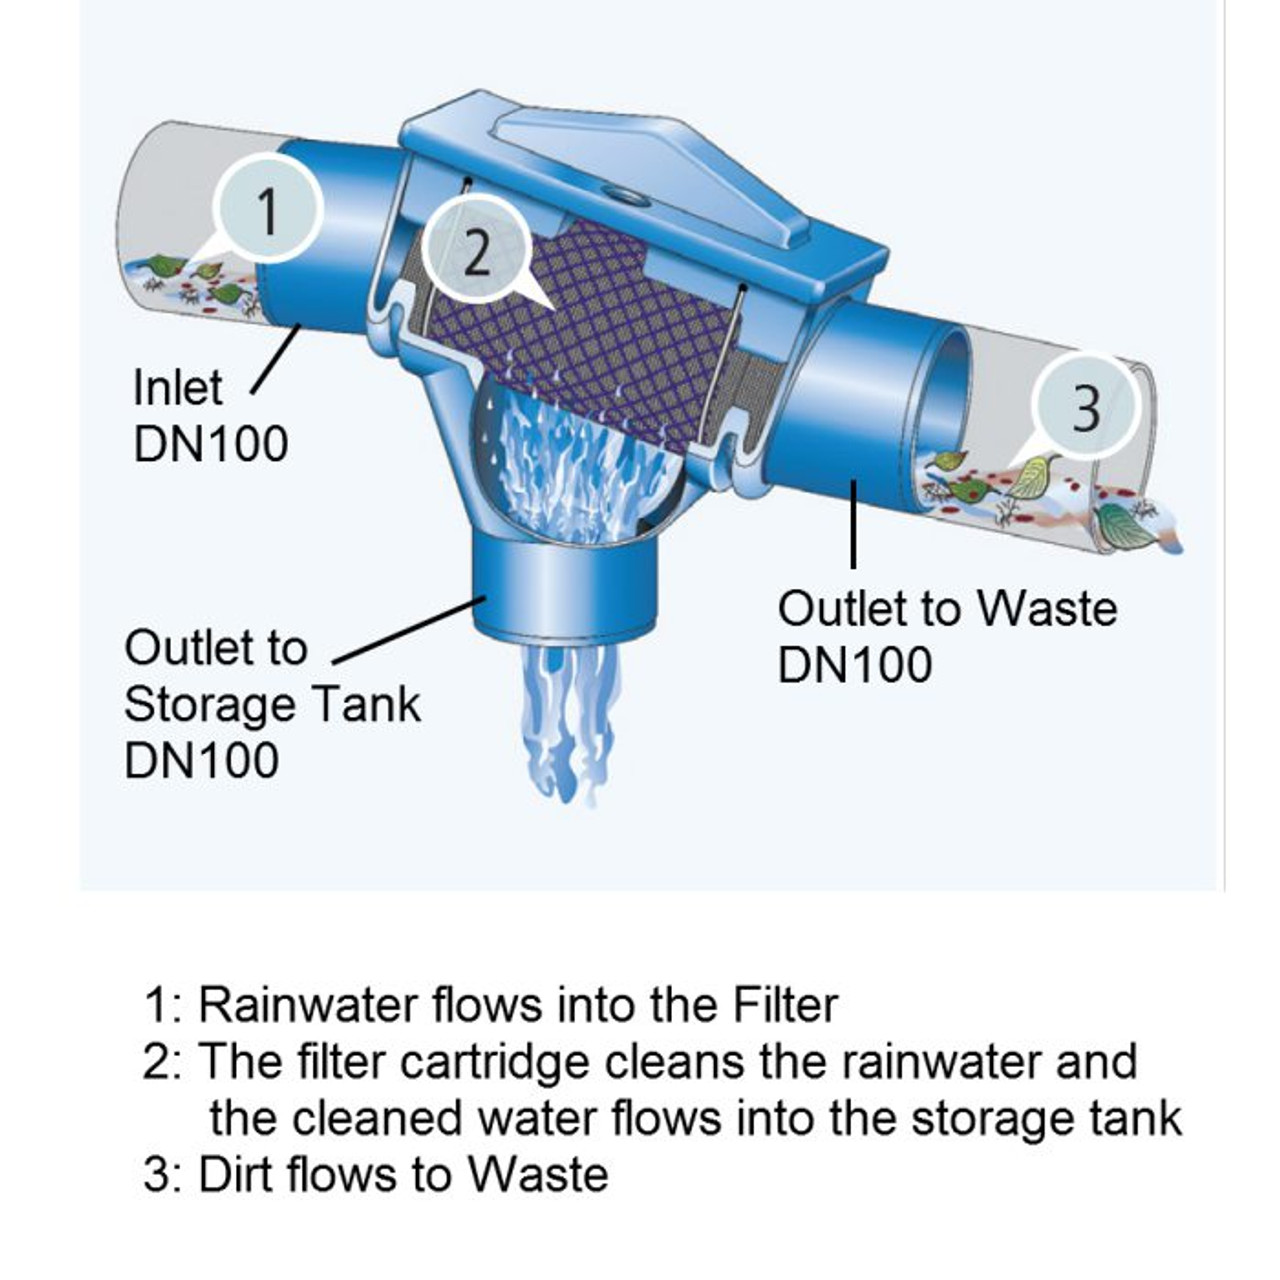 How the Patronenfilter filters Rainwater before Storage in the Water Tank.